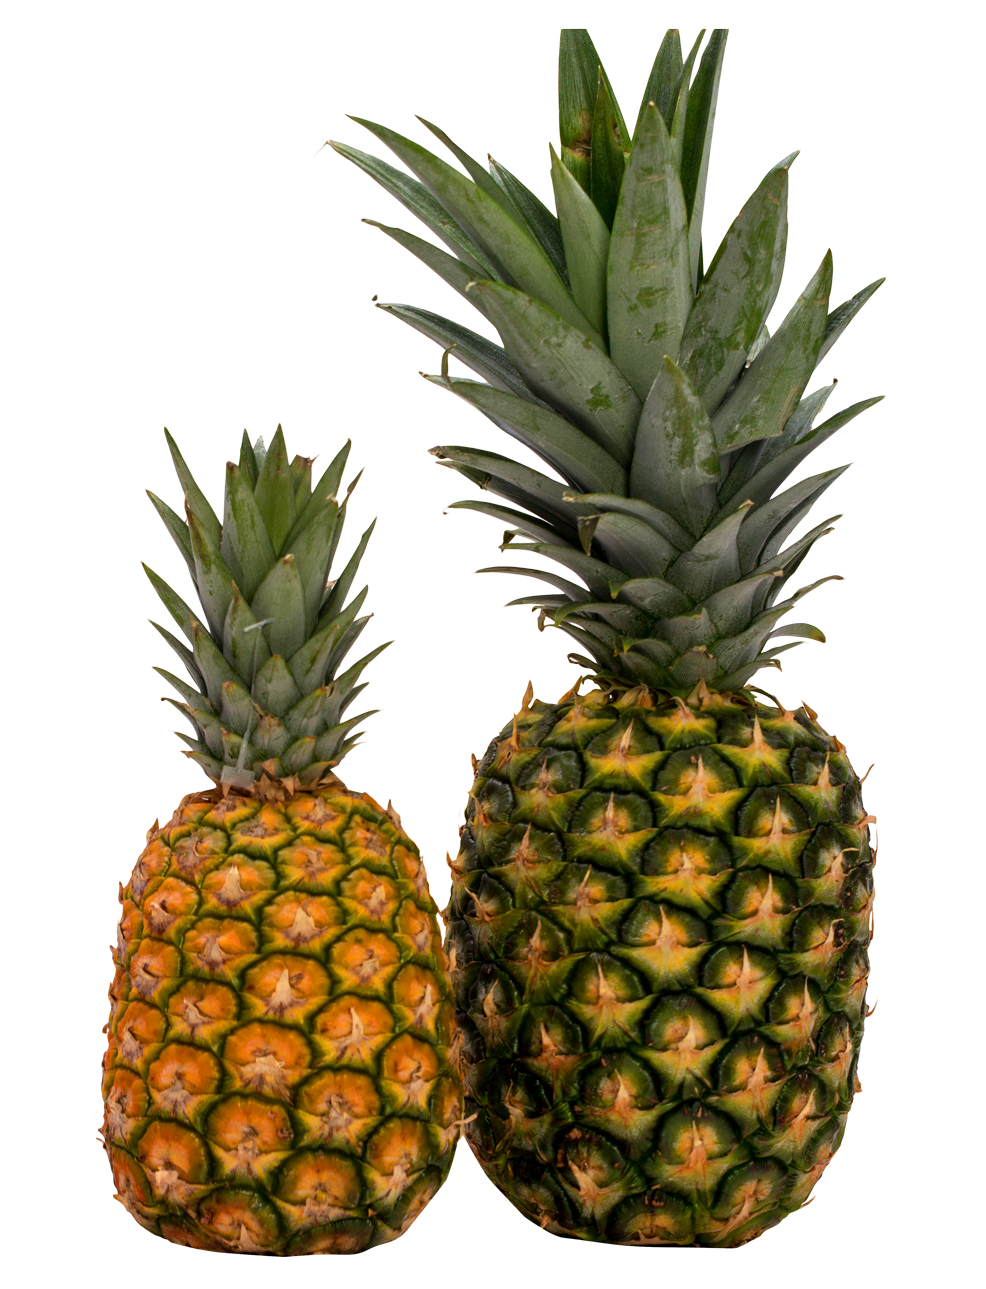 Two Pineapple